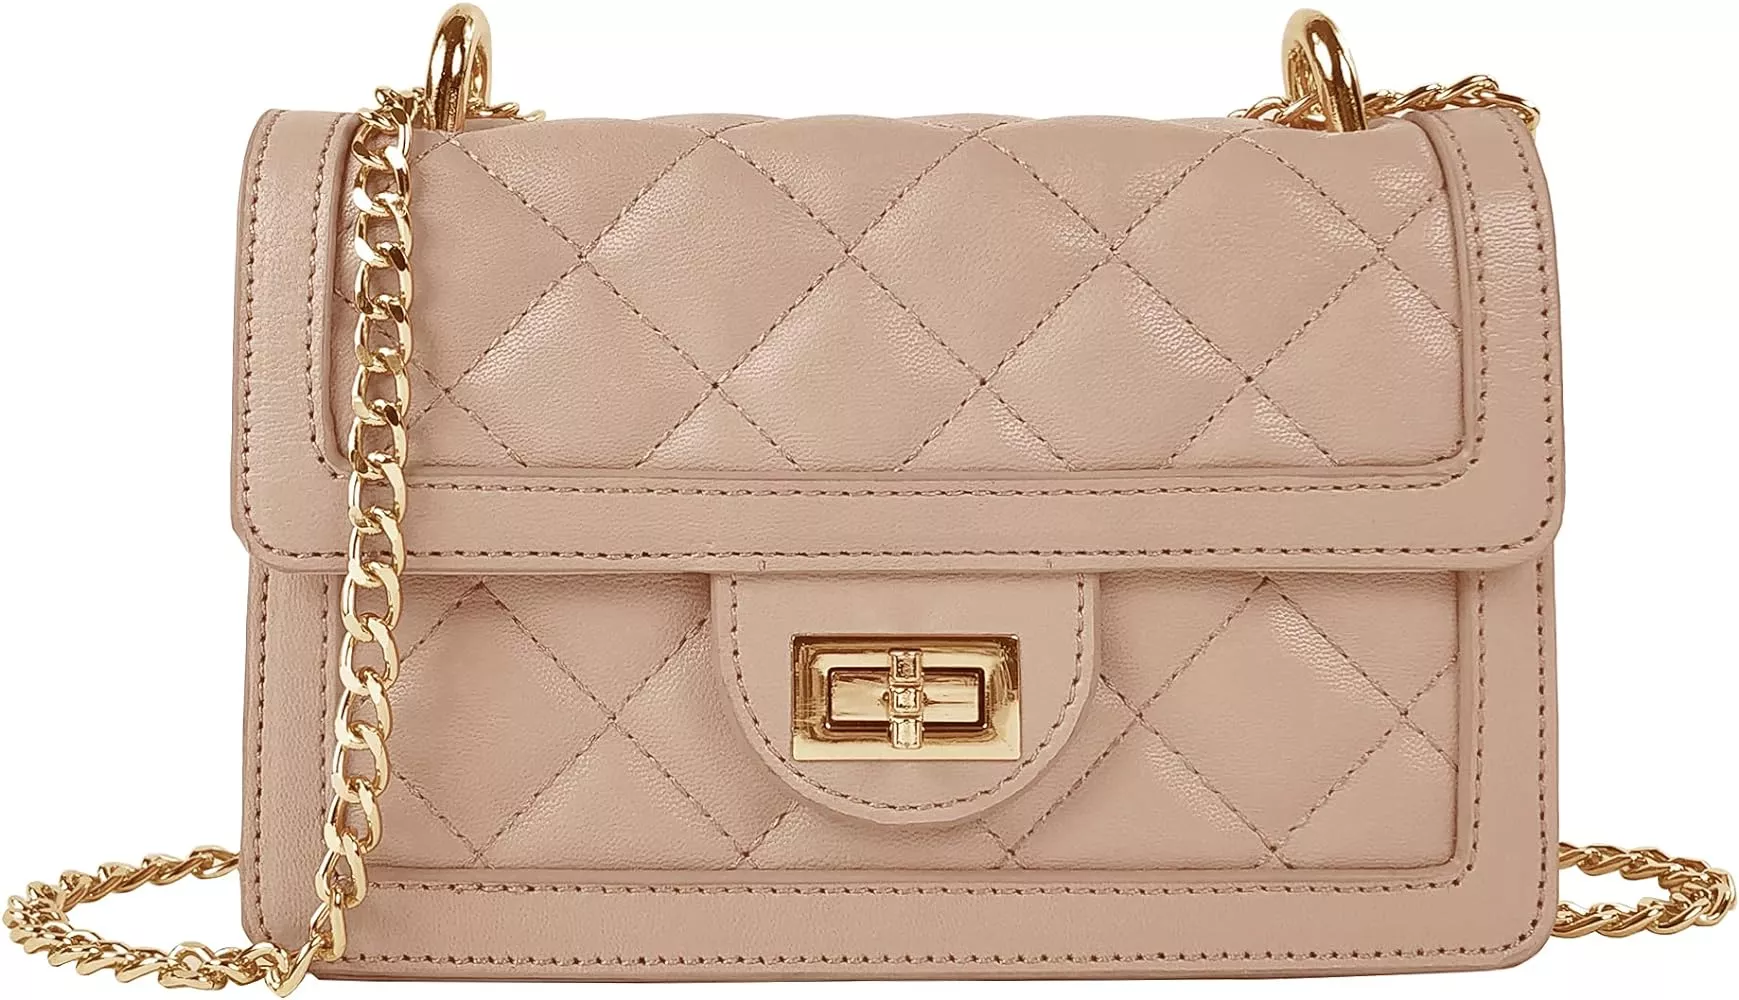 STAISE Designer Crossbody Bags for Women, Small Quilted Leather Handbags,  Trendy Womens Mini Purse, Shoulder Bag Chain Strap (Beige): Handbags